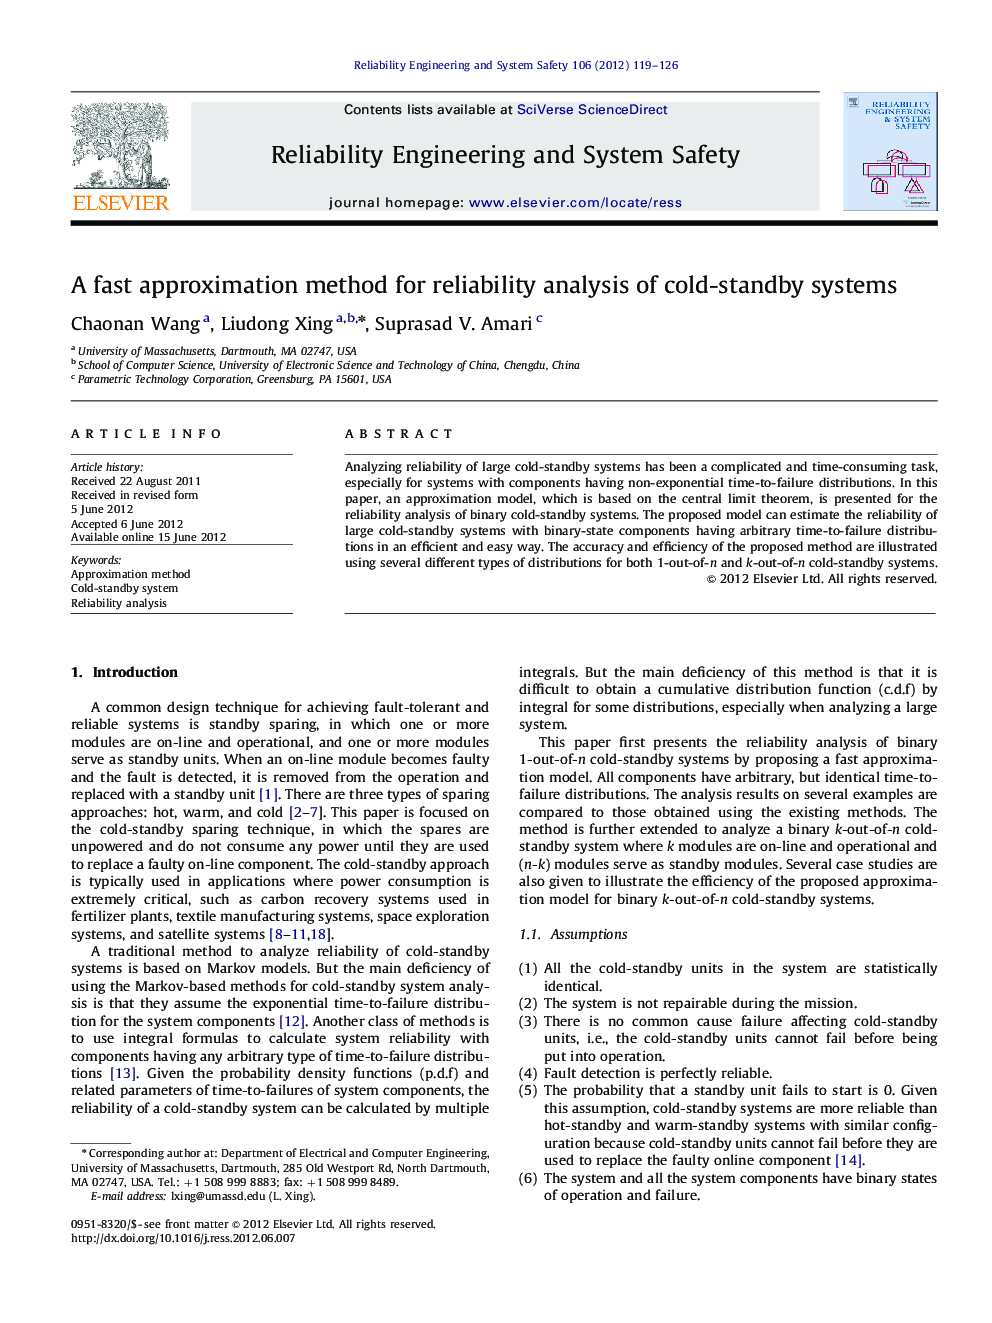 A fast approximation method for reliability analysis of cold-standby systems